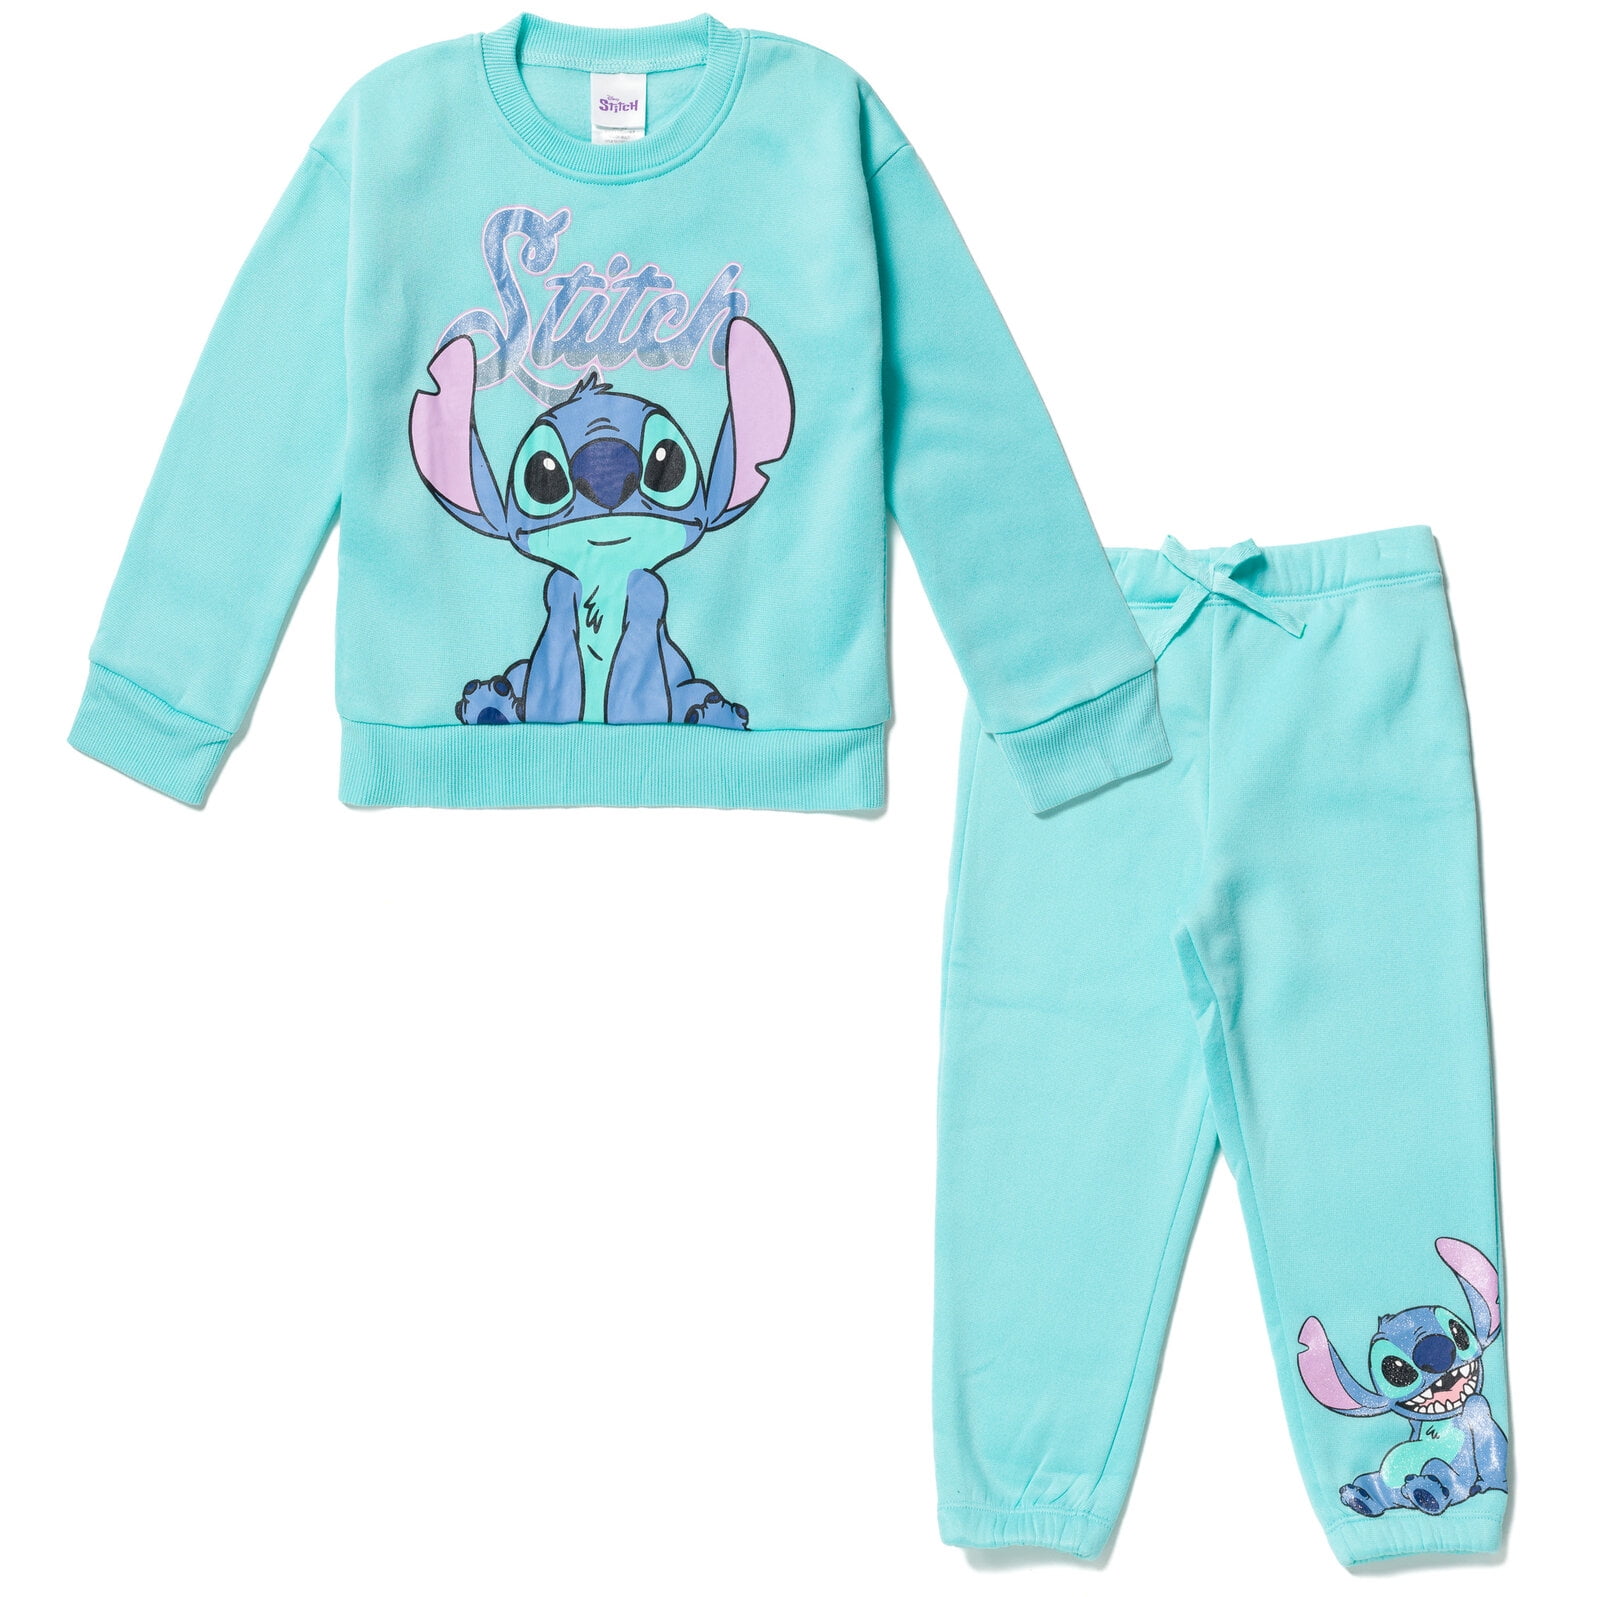 Disney's Stitch & Lilo Girls 4-12 Top & Jogger Set by Jumping Beans®